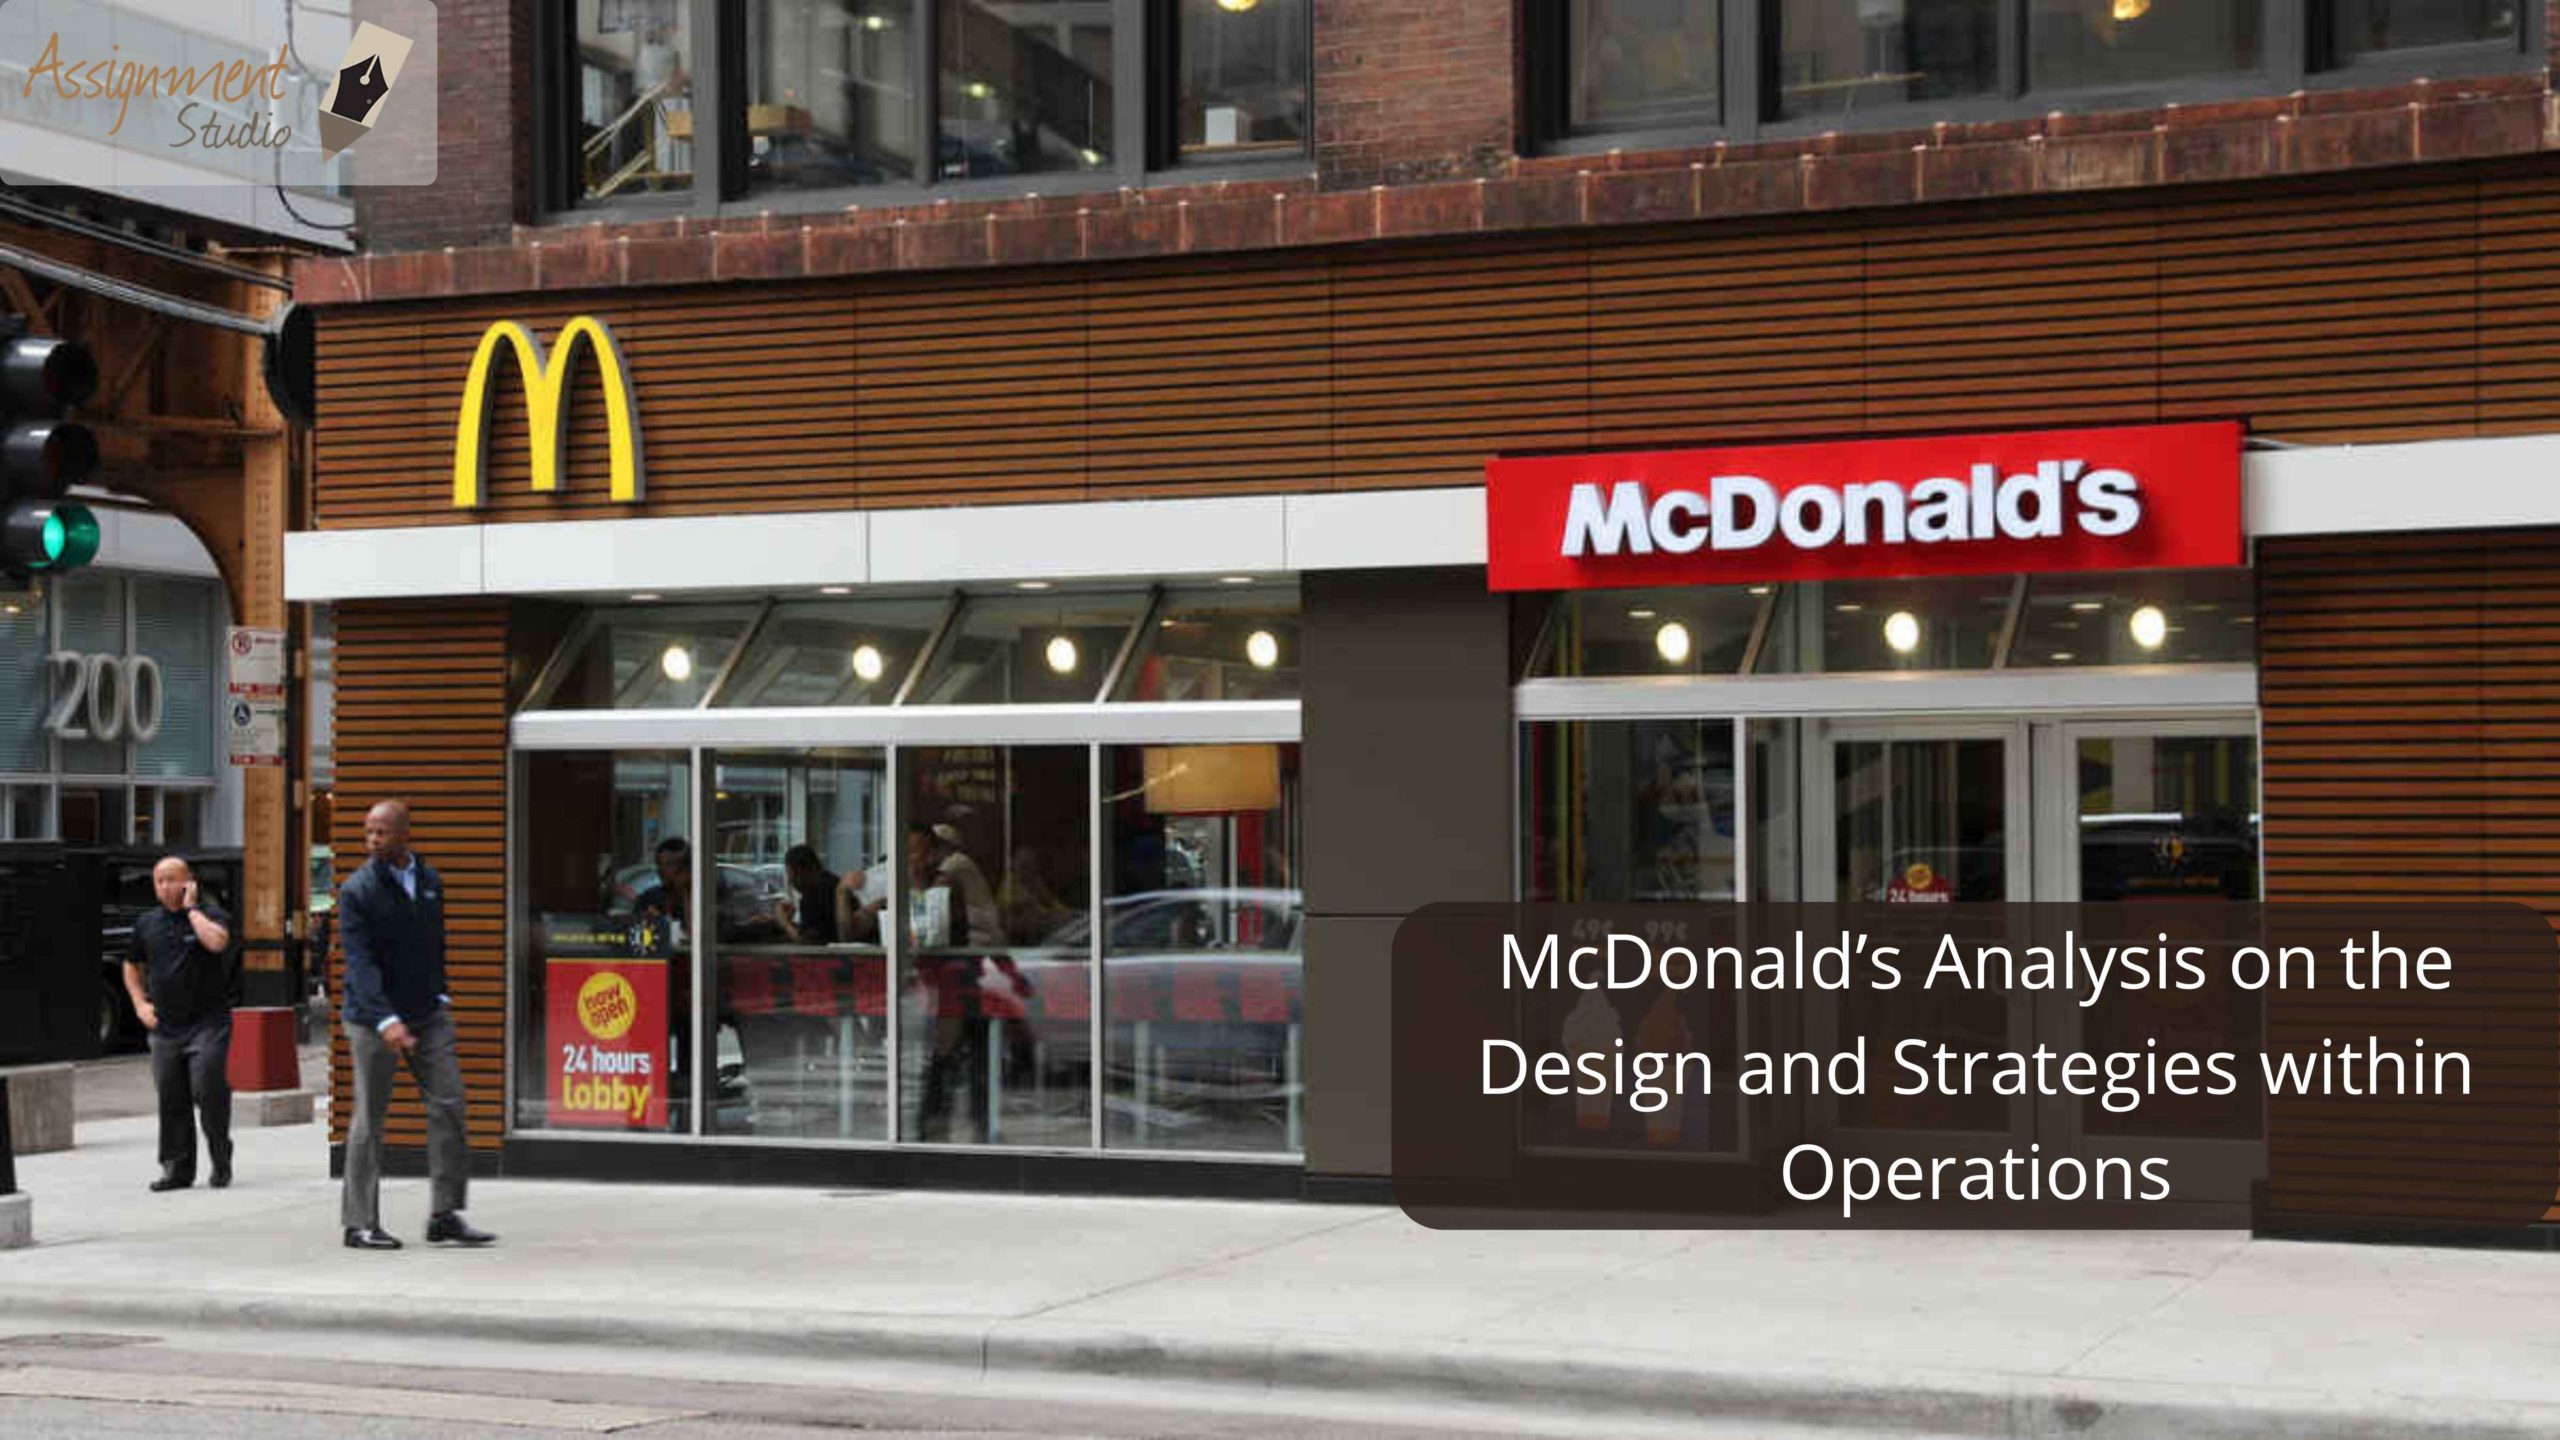 McDonald's Analysis on the design and strategies within operations